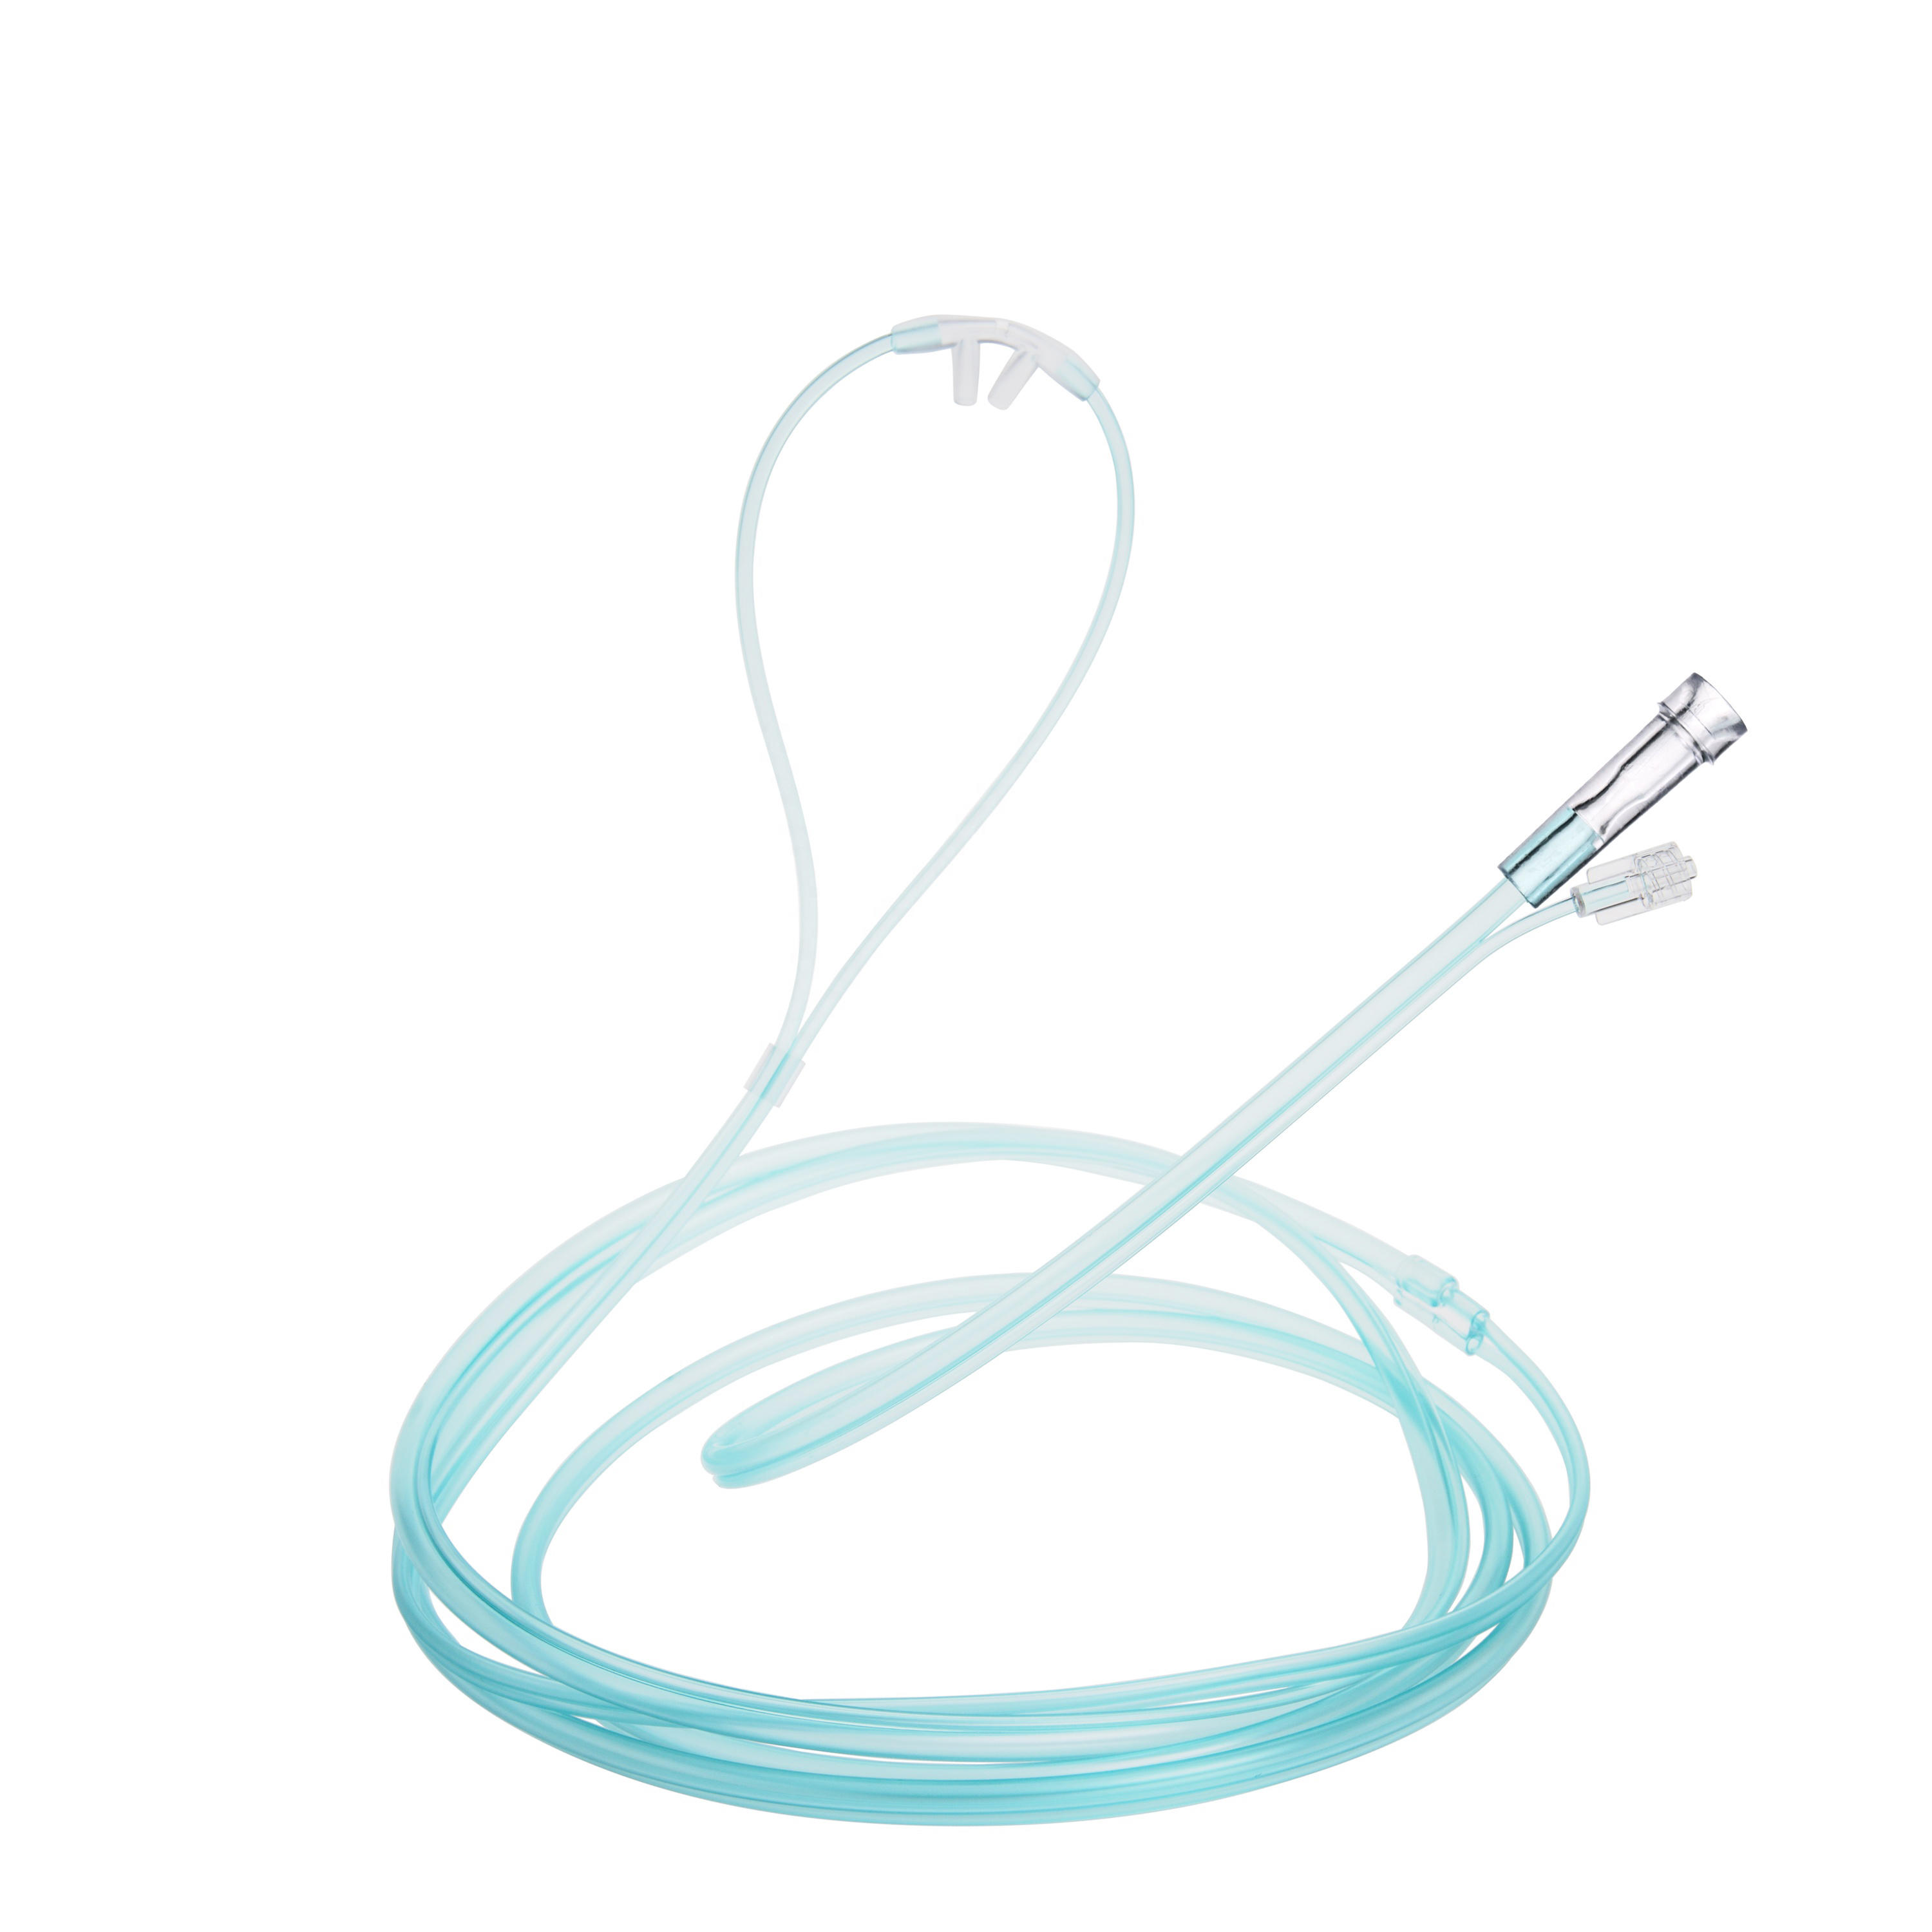 The nasal cannula is a medical device used for supplemental oxygen therapy